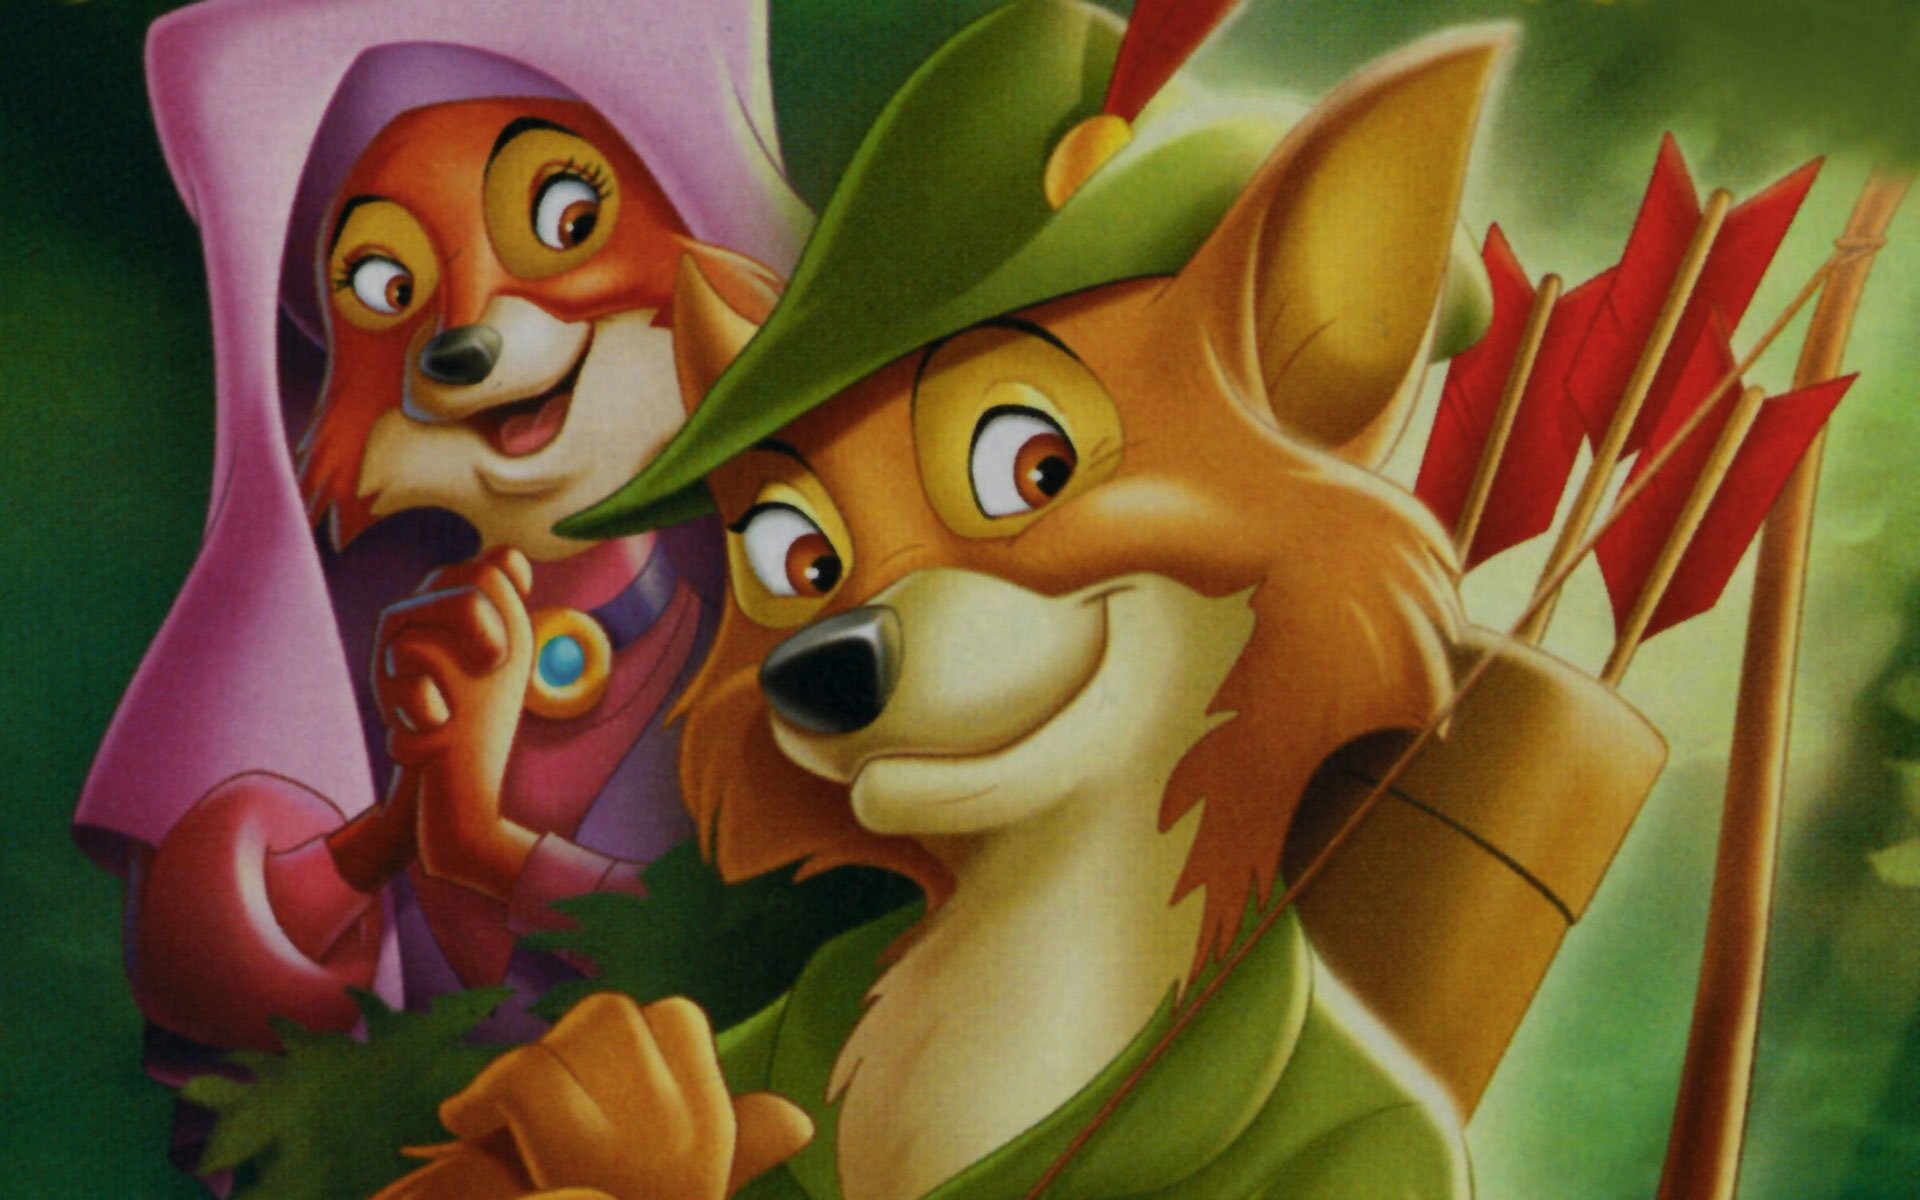 Robin Hood (Cartoon): Produced and directed by Wolfgang Reitherman, Animated film. 1920x1200 HD Wallpaper.